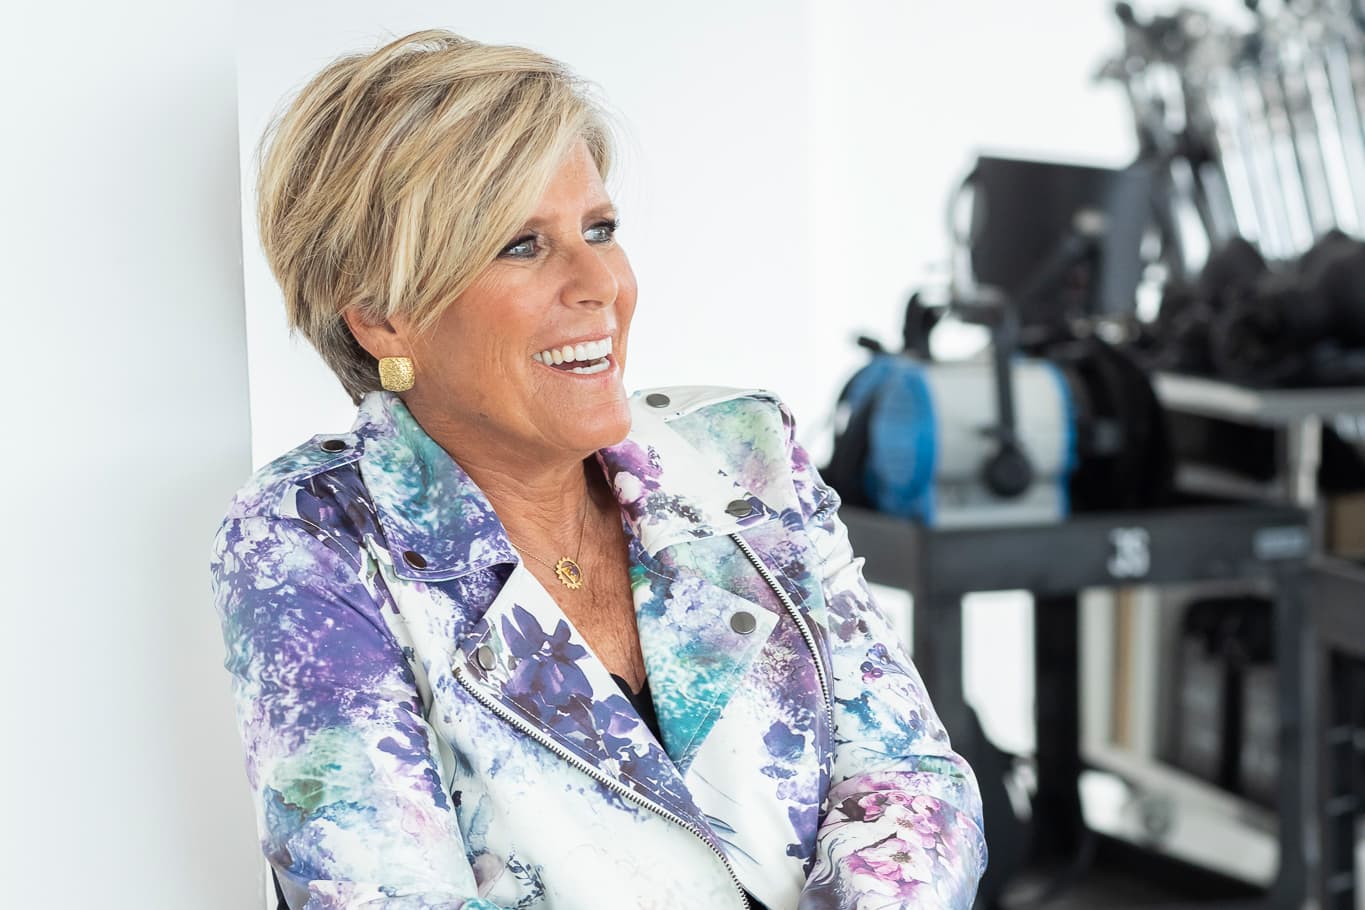 Suze Orman is staying conservative with her investments, shunning tech and buying T-bills